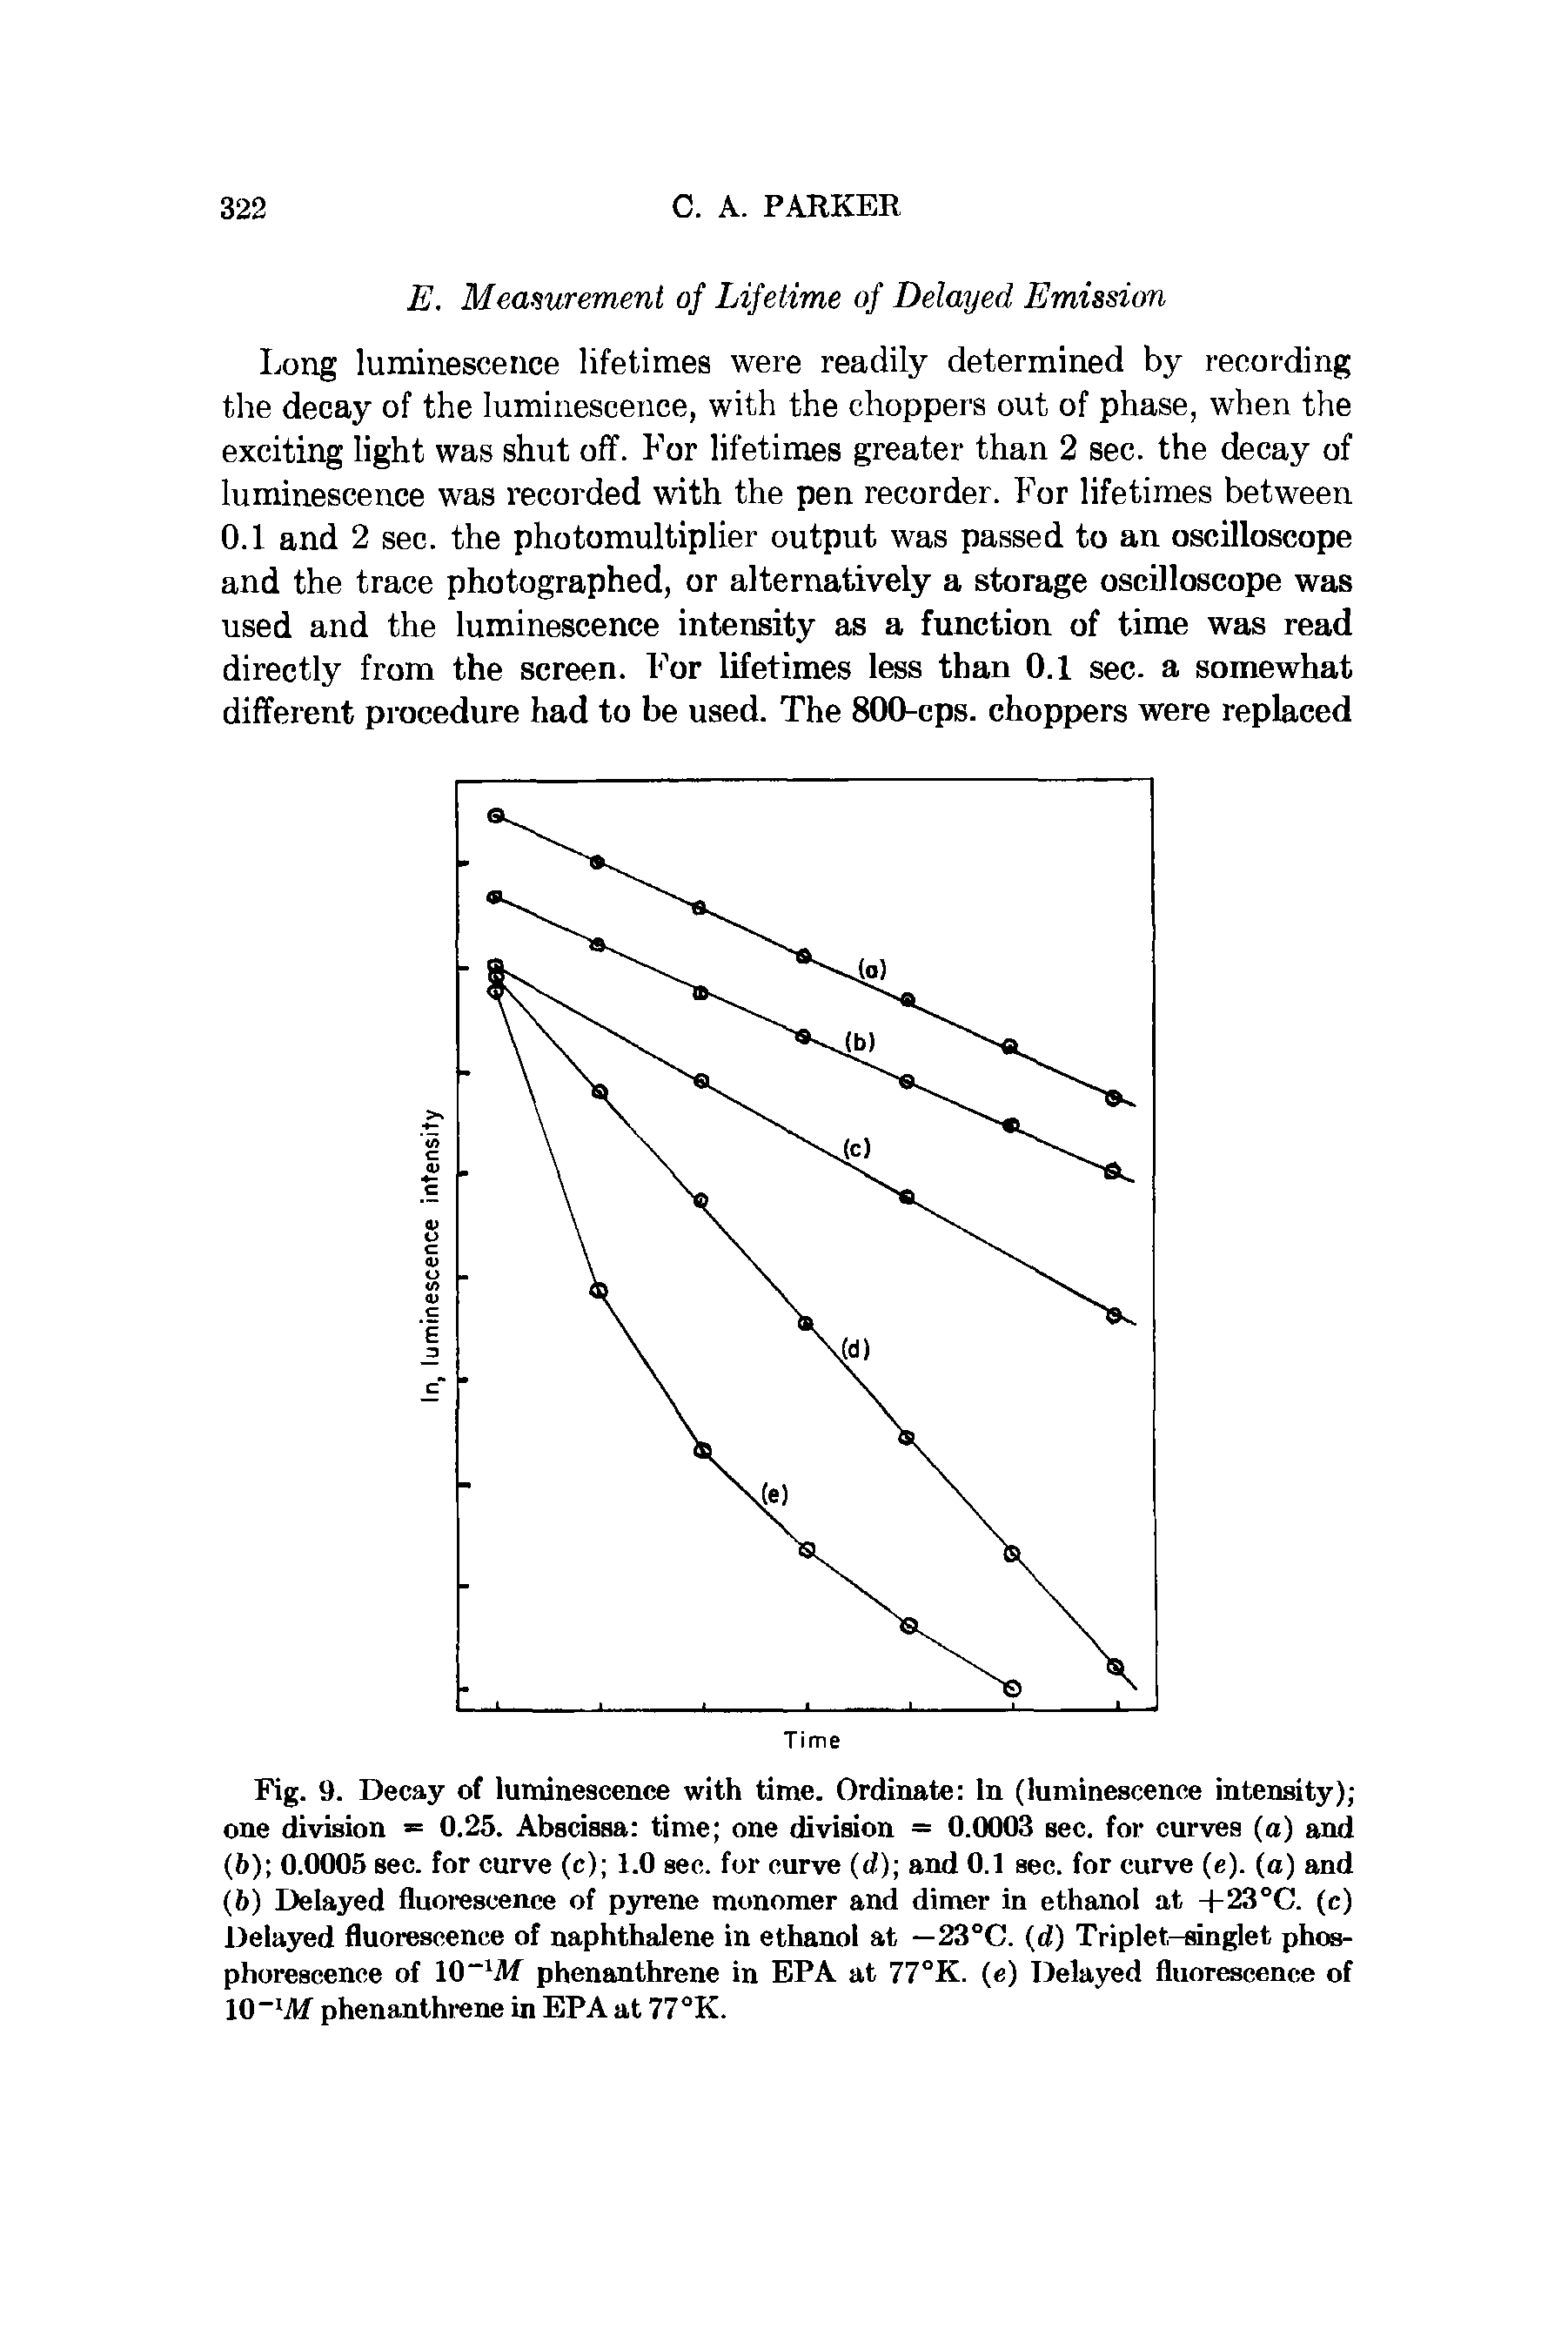 Fig. 9. Decay of luminescence with time. Ordinate In (luminescence intensity) one division = 0.25. Abscissa time one division = 0.0003 sec. for curves (a) and (6) 0.0005 sec. for curve (c) 1.0 sec. for curve (d) and 0.1 sec. for curve (e). (a) and (6) Delayed fluorescence of pyrene monomer and dimer in ethanol at +23°C. (c) Delayed fluorescence of naphthalene in ethanol at —23°C. (d) Triplet-singlet phosphorescence of 10-W phenanthrene in EPA at 77°K. (e) Delayed fluorescence of 10-lAf phenanthrene in EPA at 77°K.